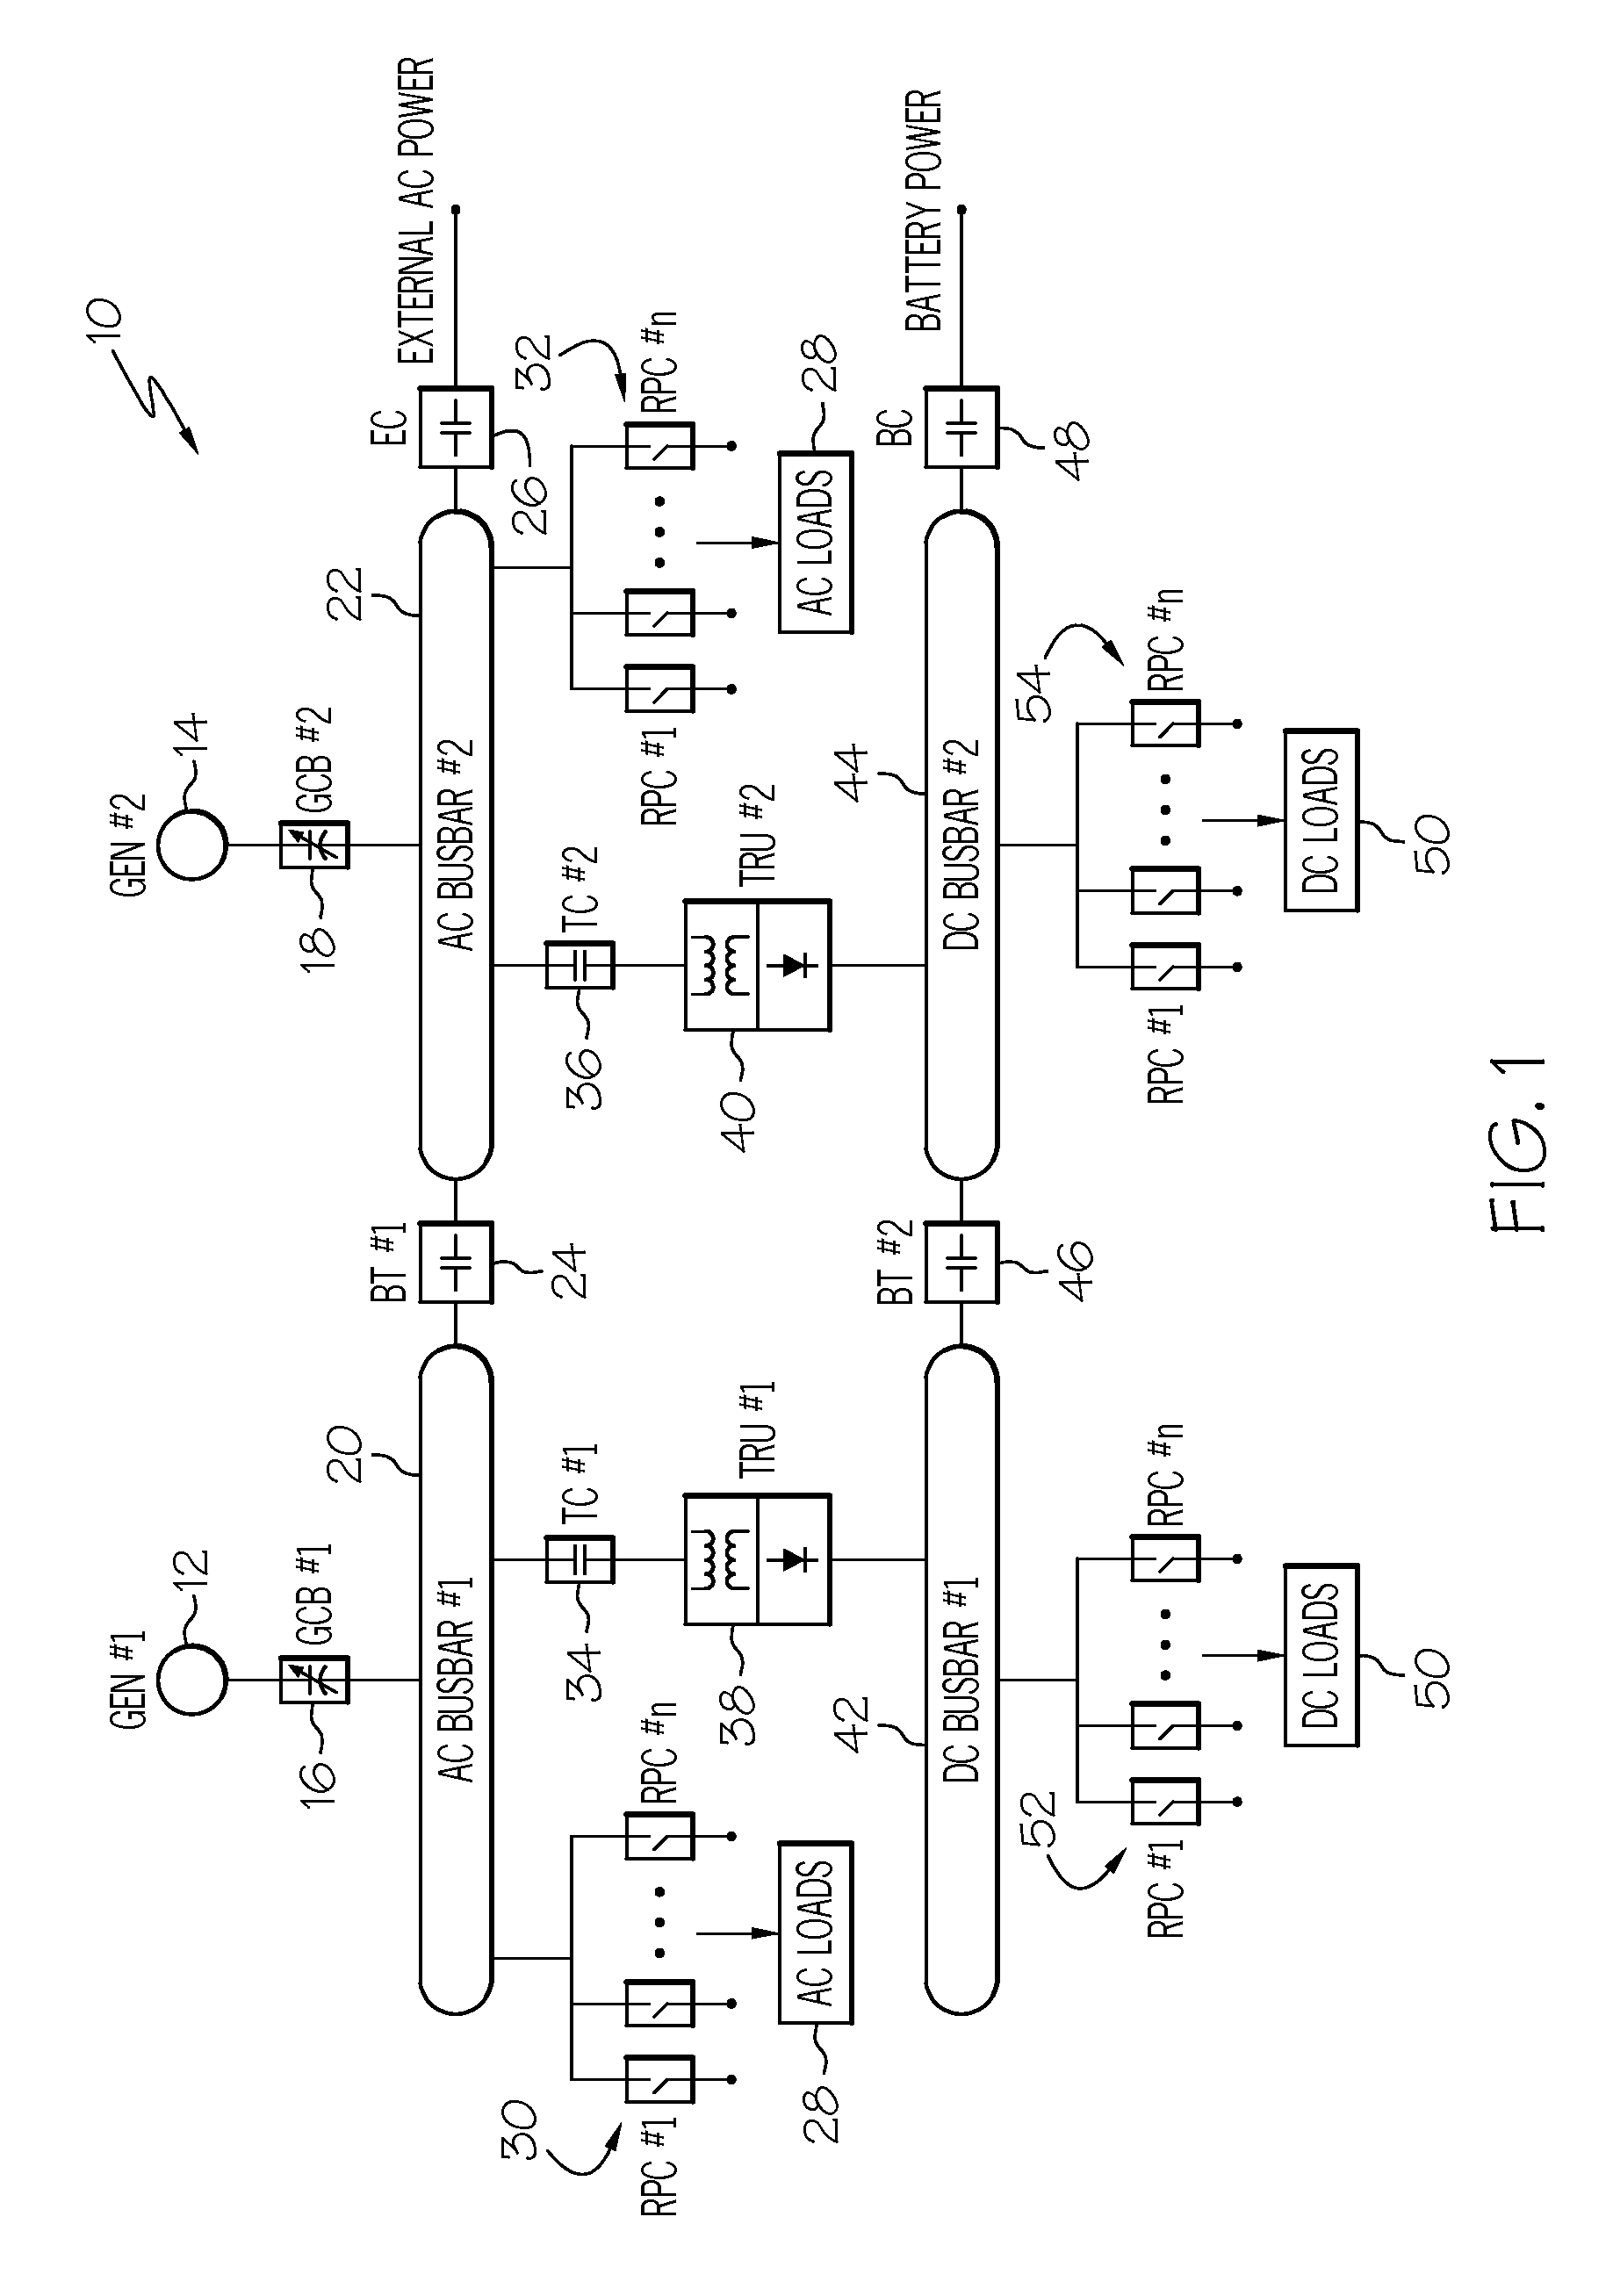 Power line communication based aircraft power distribution system with real time wiring integrity monitoring capability